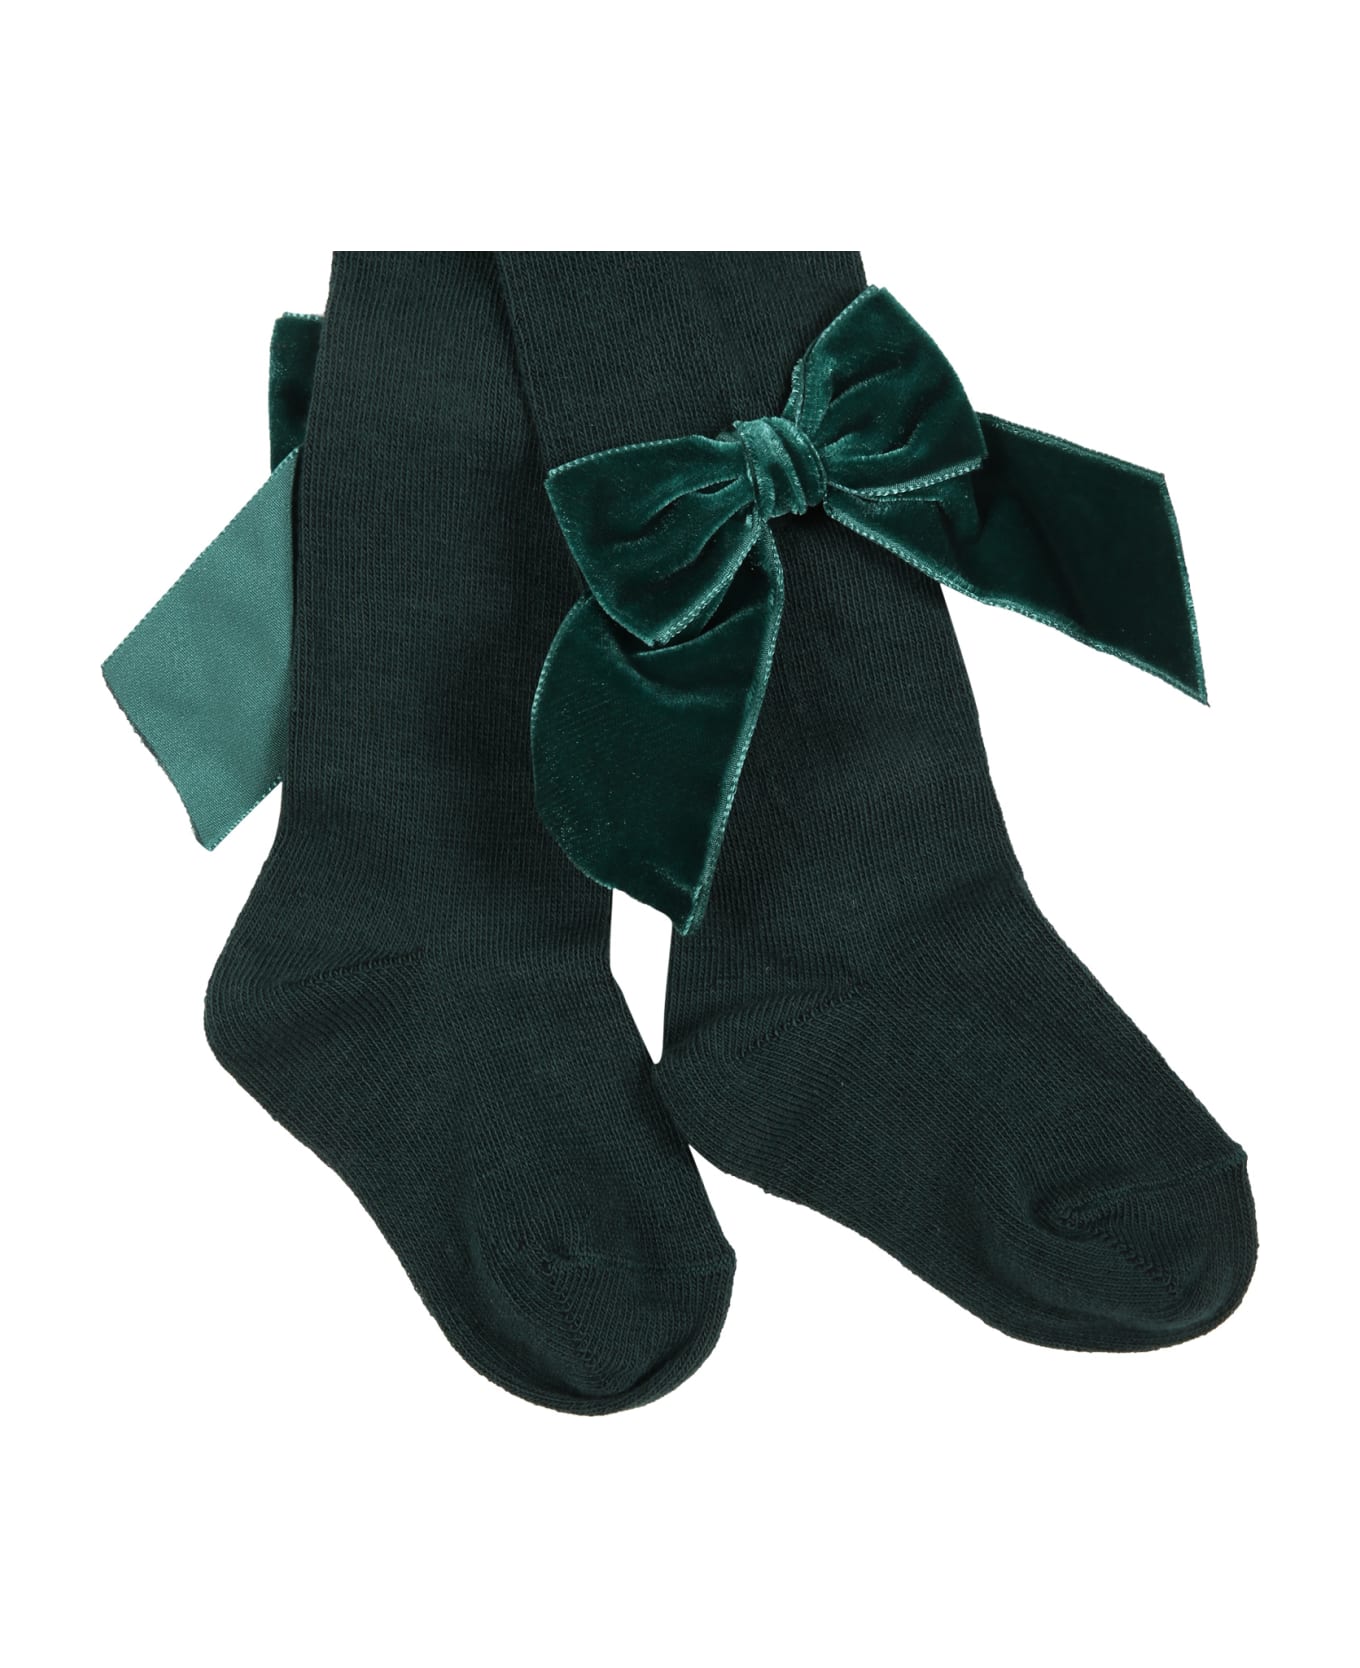 Story Loris Green Tights For Girl With Bow - Green